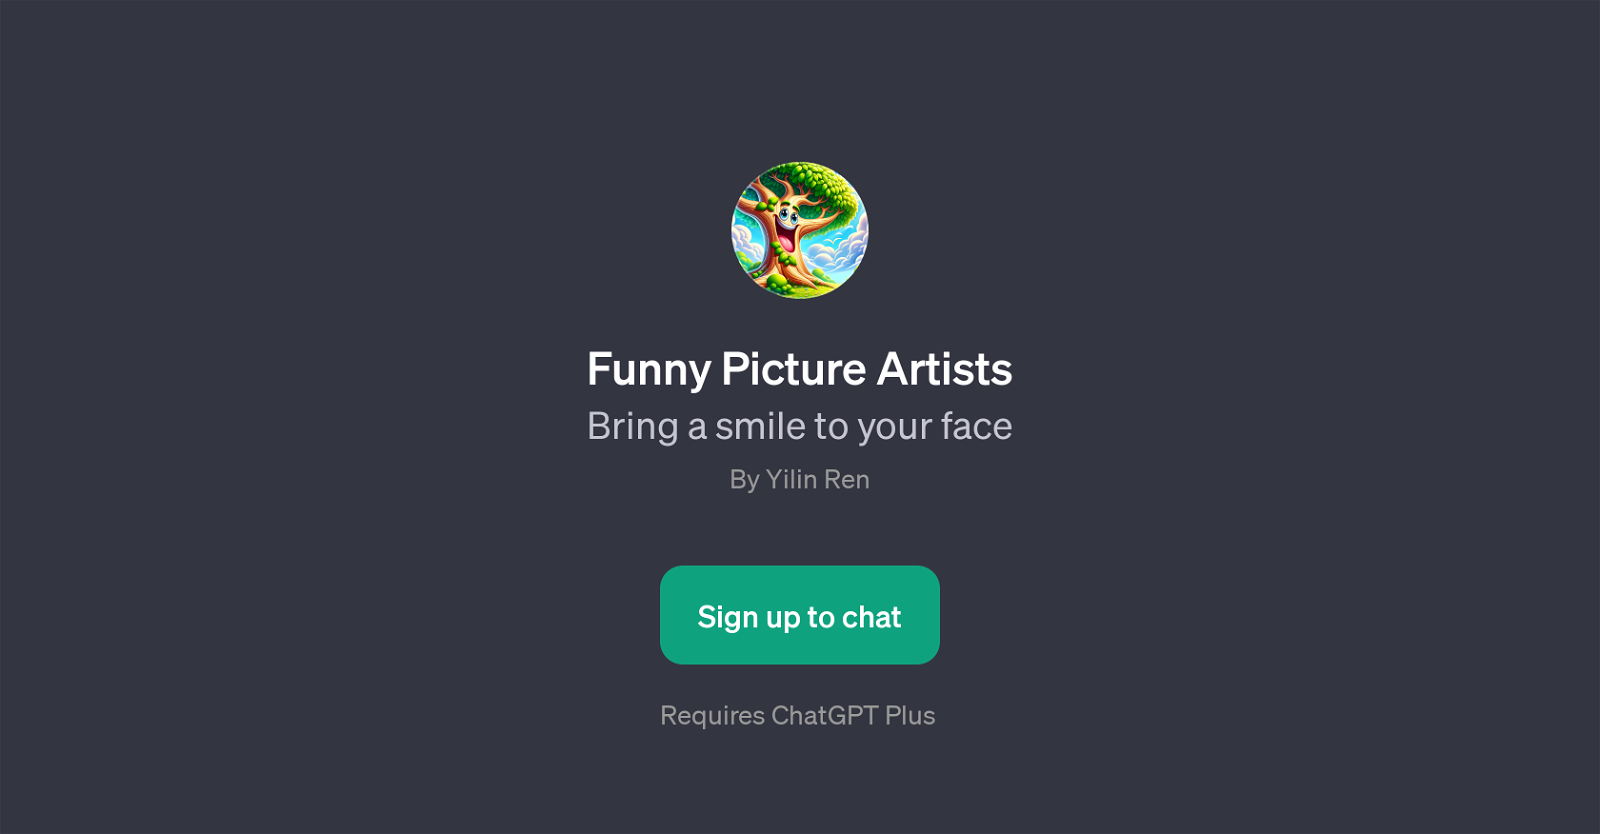 Funny Picture Artists website